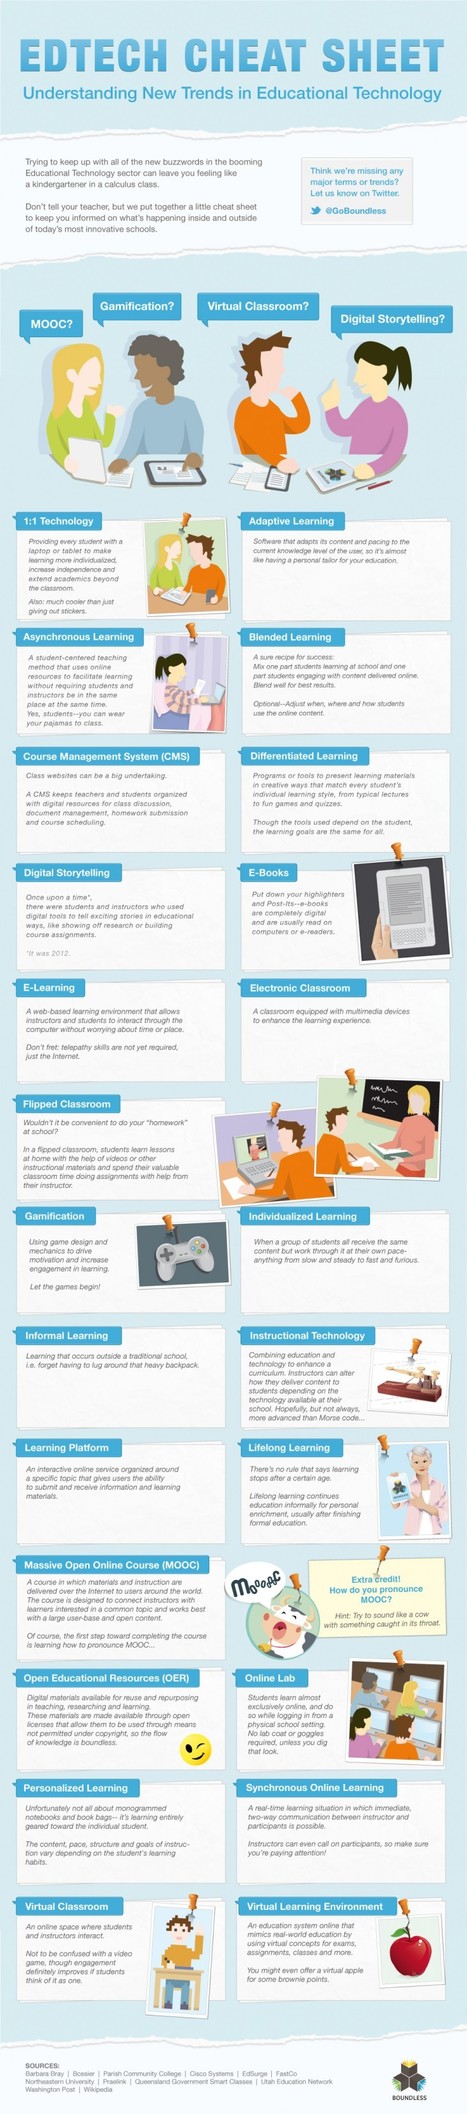 The Must-Have EdTech Cheat Sheet [Infographic] | Moodle and Web 2.0 | Scoop.it